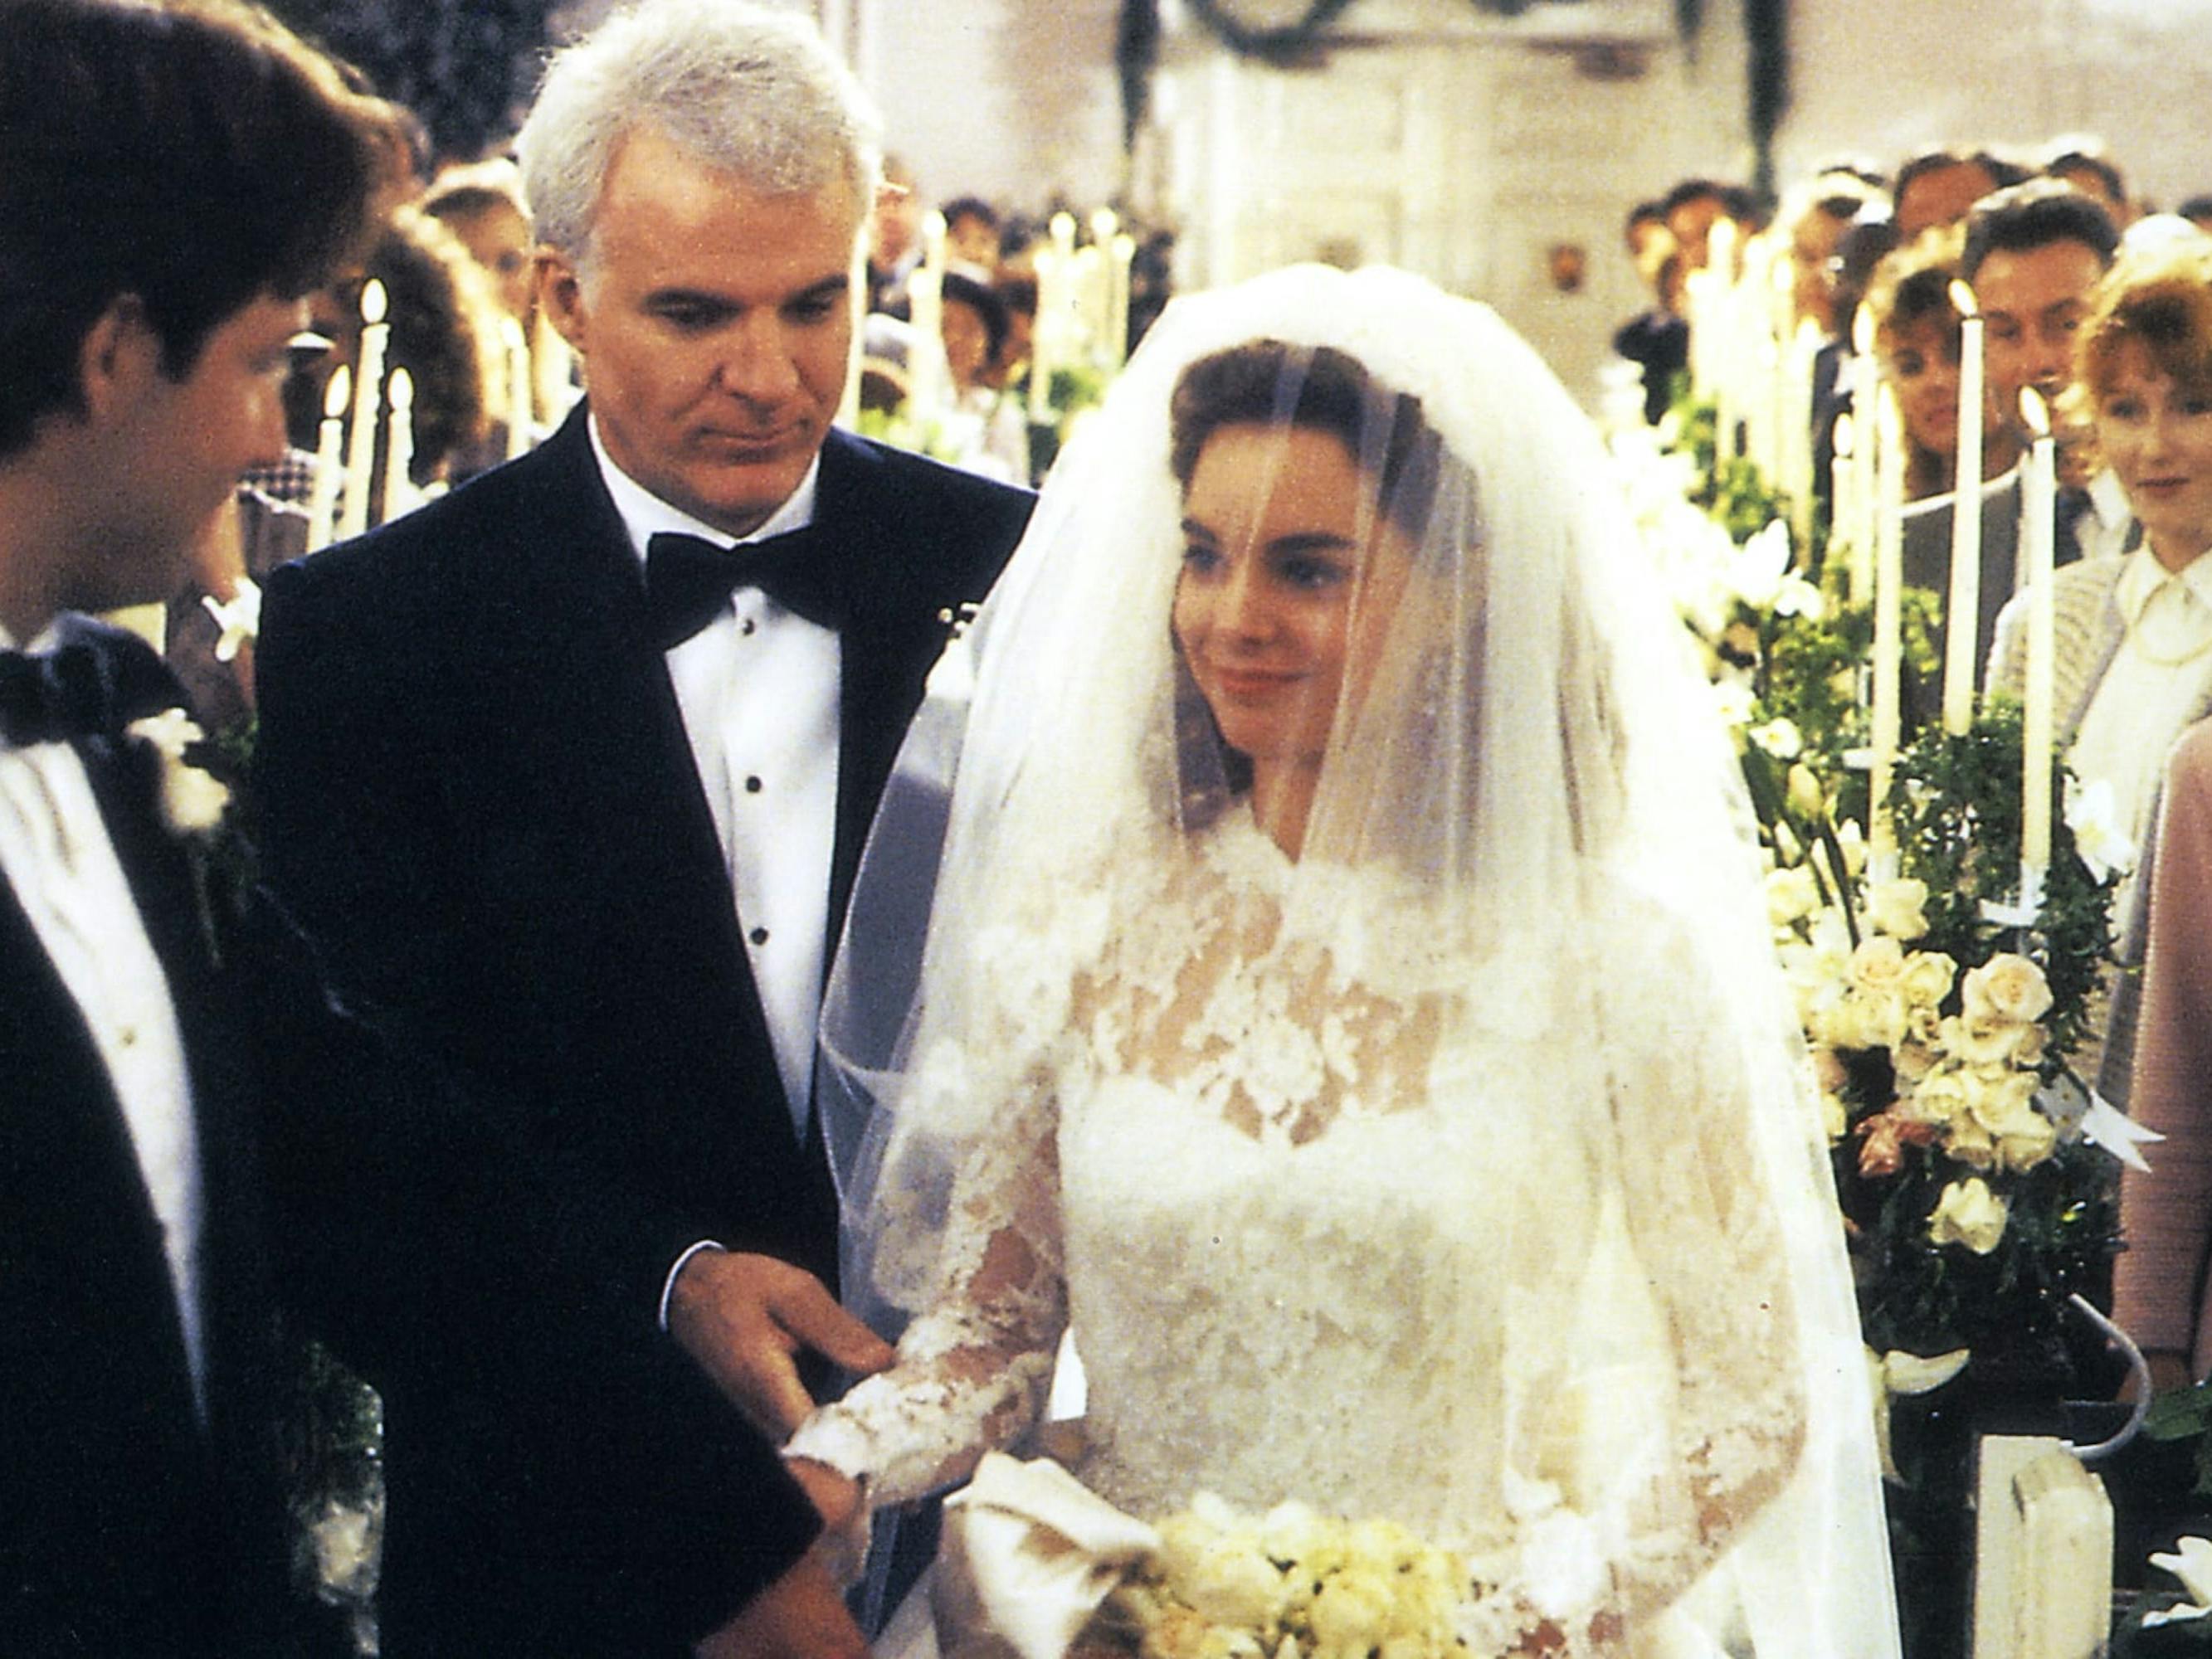 Bryan MacKenzie (George Newbern), George Banks (Steve Martin), and Annie Banks-MacKenzie (Kimberly Williams-Paisley) in Father of the Bride. The make their way down the aisle of a church, with loving family and friends smiling from the pews.